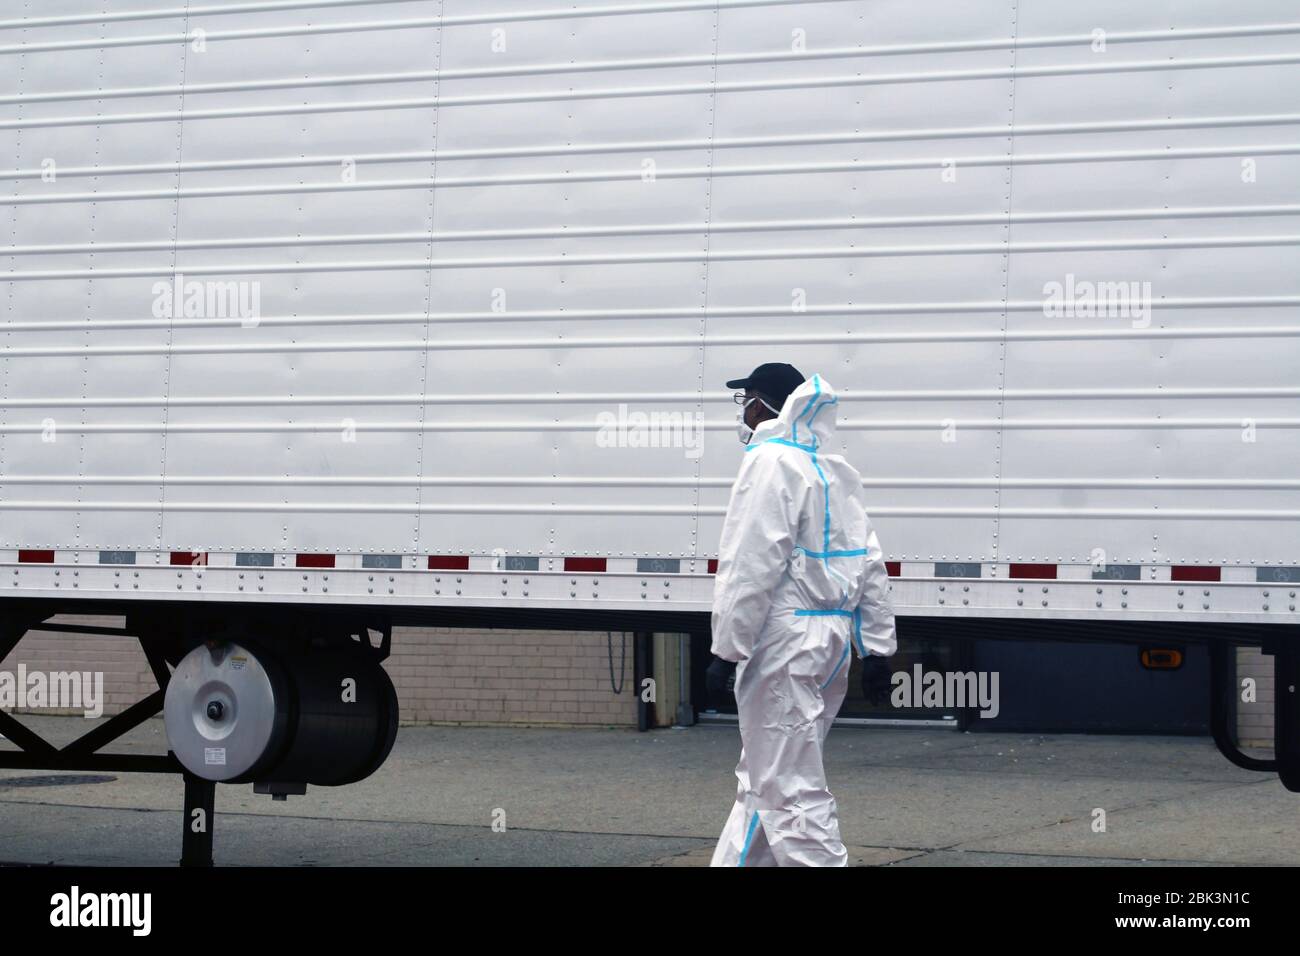 April 30, 2020, New York, New York, USA: This worker, dressed in a hazmat, runs alongside a large refrigerated truck parked in front of the Andrew T. Cleckley Funeral Home in Brooklyn where bodies non properly cared are removed. 60 corpses were stored in 4 rented vehiciles lining the street nearby stores. Neighbors reported a foul smell still persistent and fluids dripping from the trucks. Some remains were also found lying on the facilityÃ¢â‚¬â„¢s floor. The funeral home was overwhelmed by COVID-19 deaths, waiting for weeks for cremations in New York. (Credit Image: © Marie Le Ble/ZUMA Wire) Stock Photo